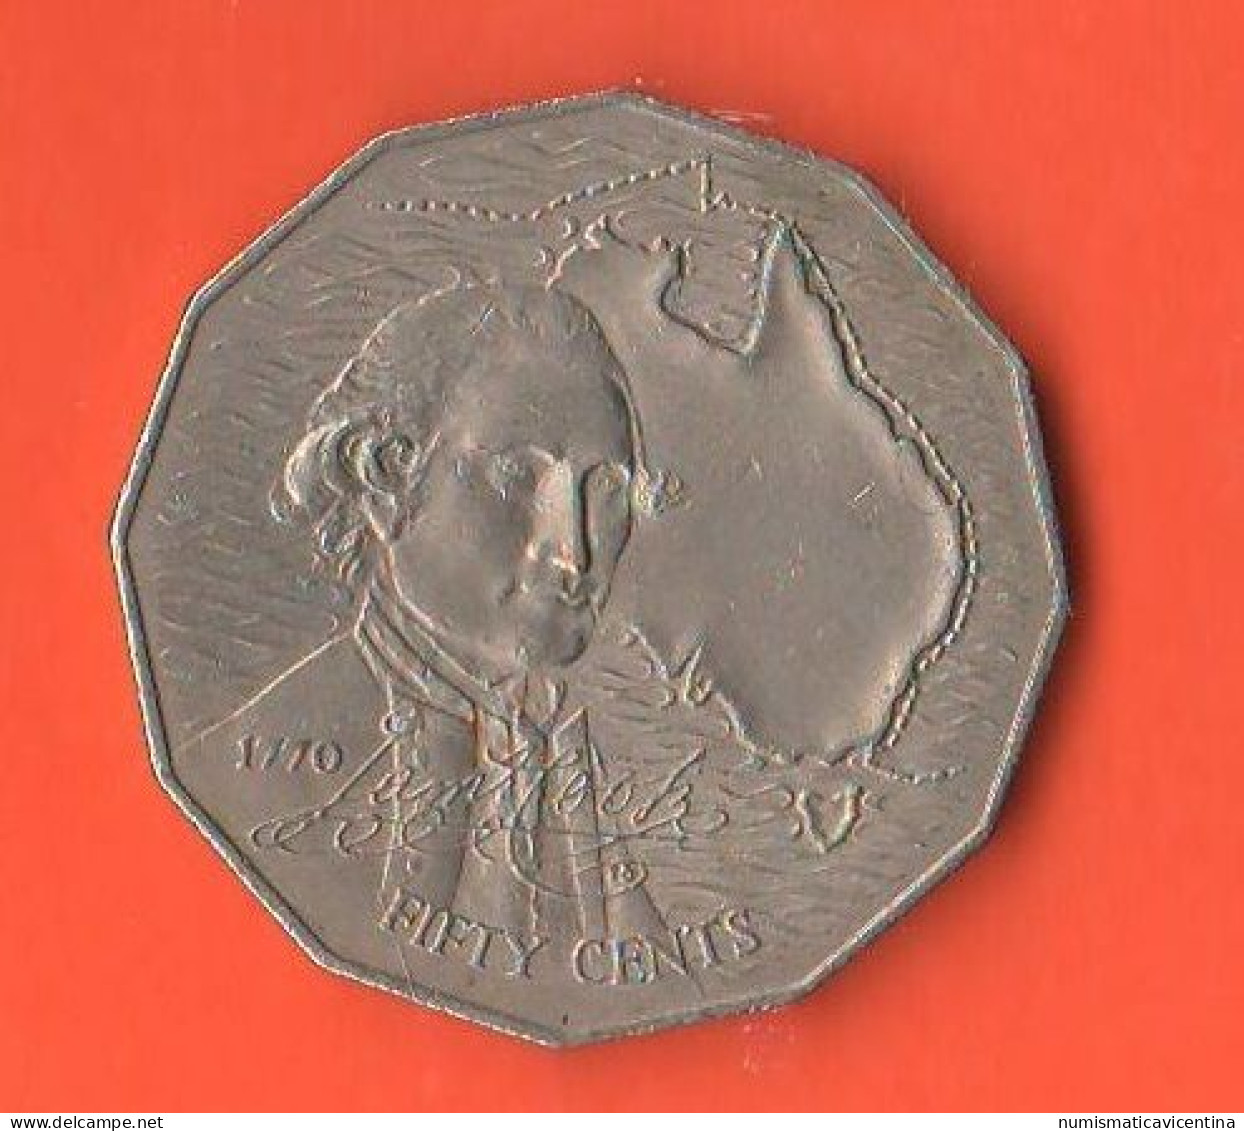 Australia 50 Cents Captain Cook's 200th Anniversary 1970 King Nickel Coin - 50 Cents